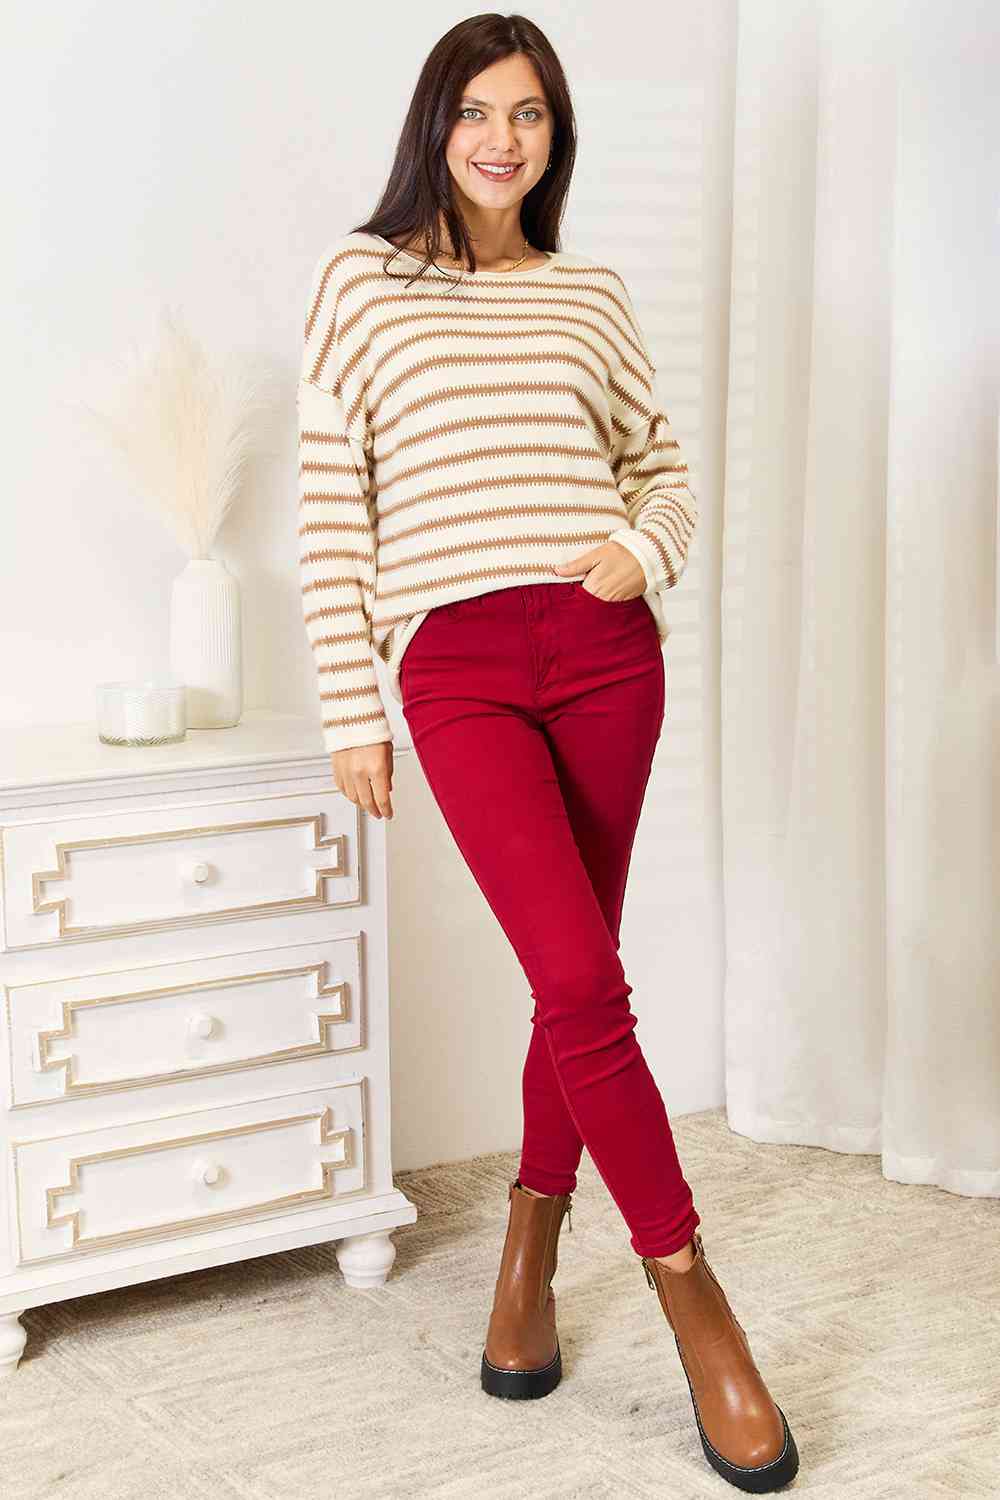 Double Take Striped Boat Neck Sweater - EMMY